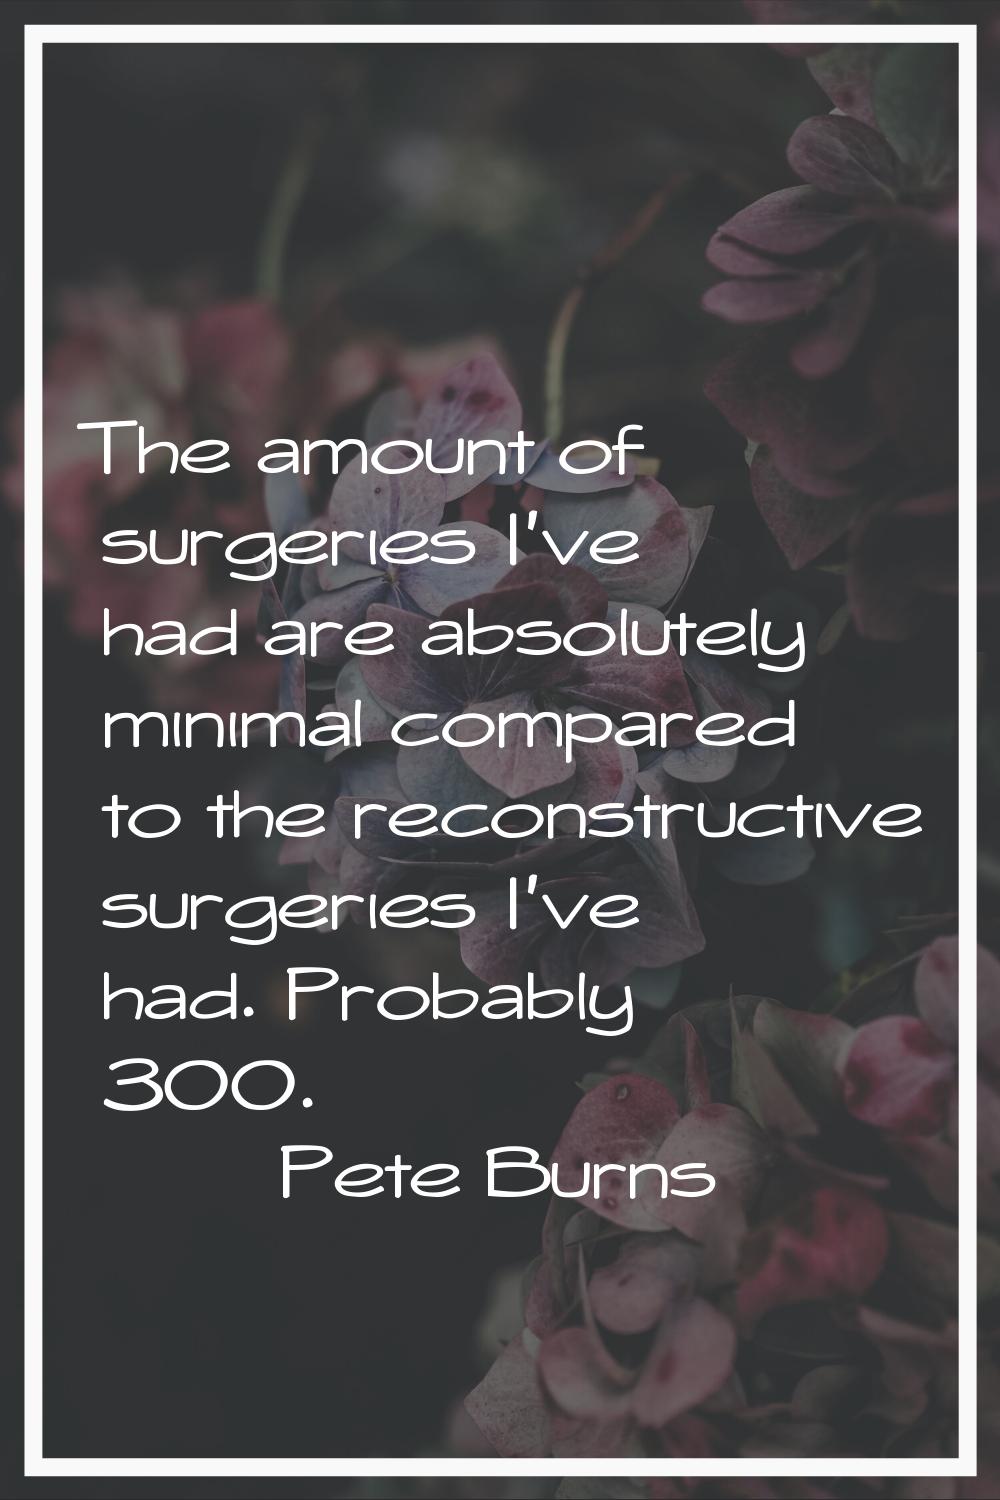 The amount of surgeries I've had are absolutely minimal compared to the reconstructive surgeries I'